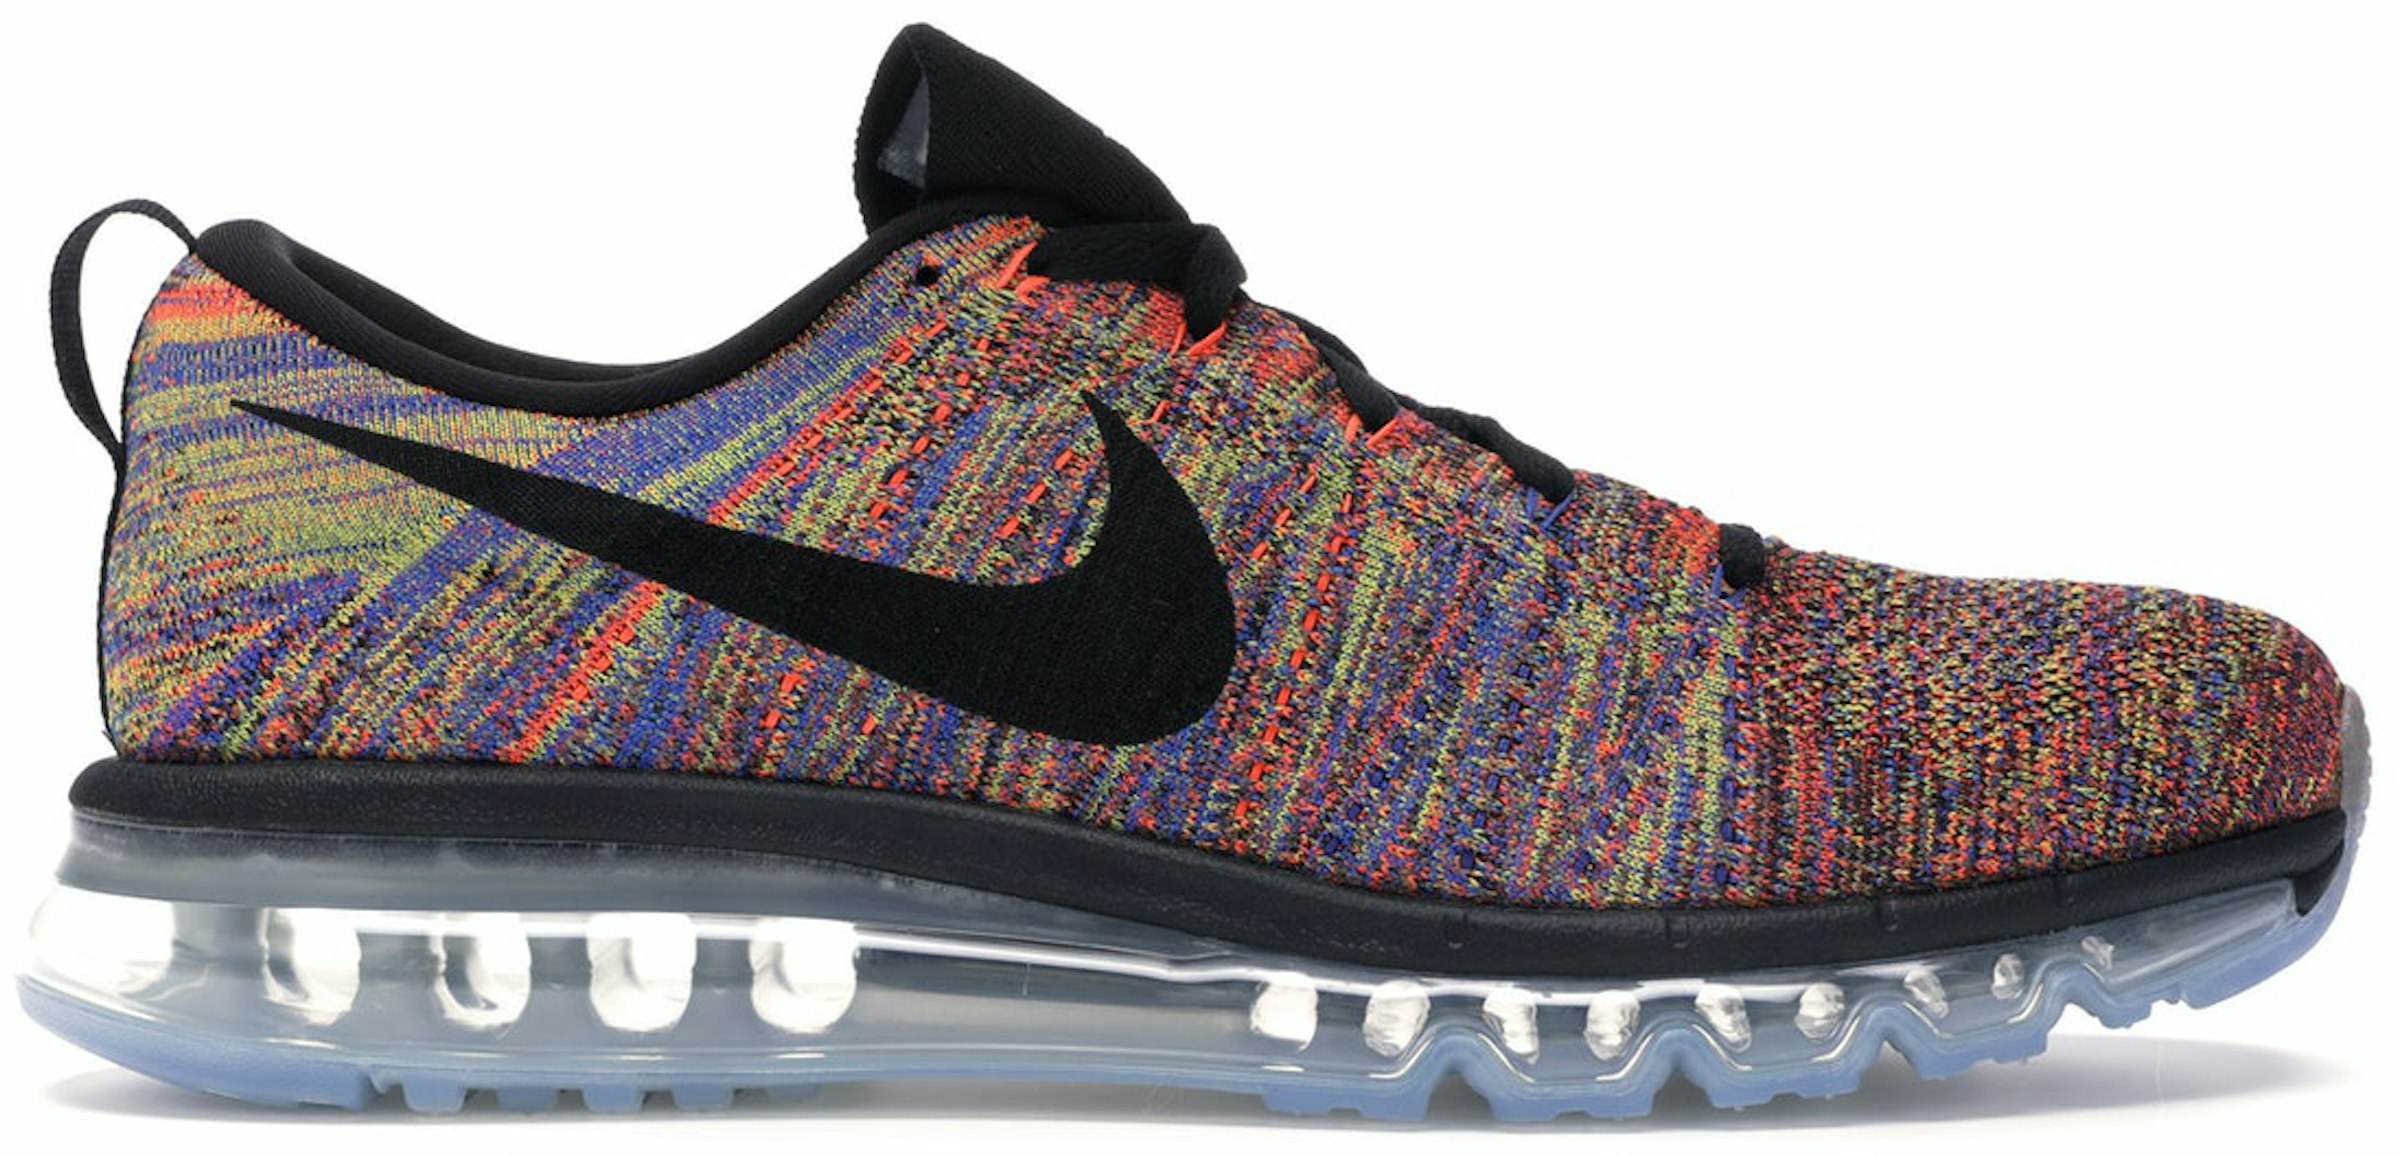 Nike Flyknit Air Max Multi-Color 620469-012 - US